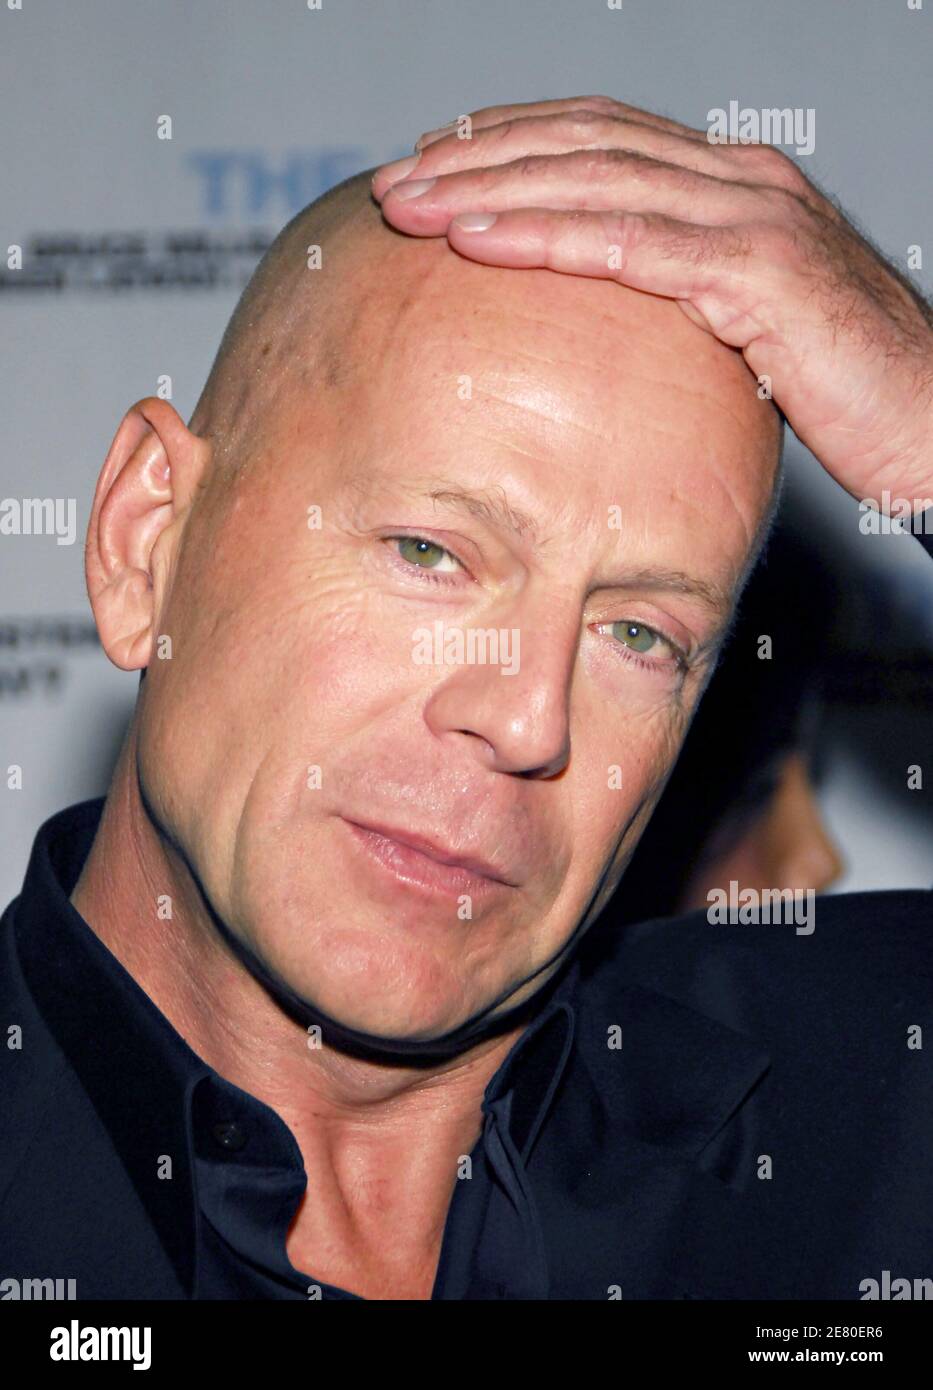 Film Executive Producer Bruce Willis arrives for the premiere of 'The Hip Hop Project' at the Clearview Chelsea West Theater, in New York City, NY, USA, on April 30, 2007. Photo by Donna Ward/ABACAPRESS.COM Stock Photo